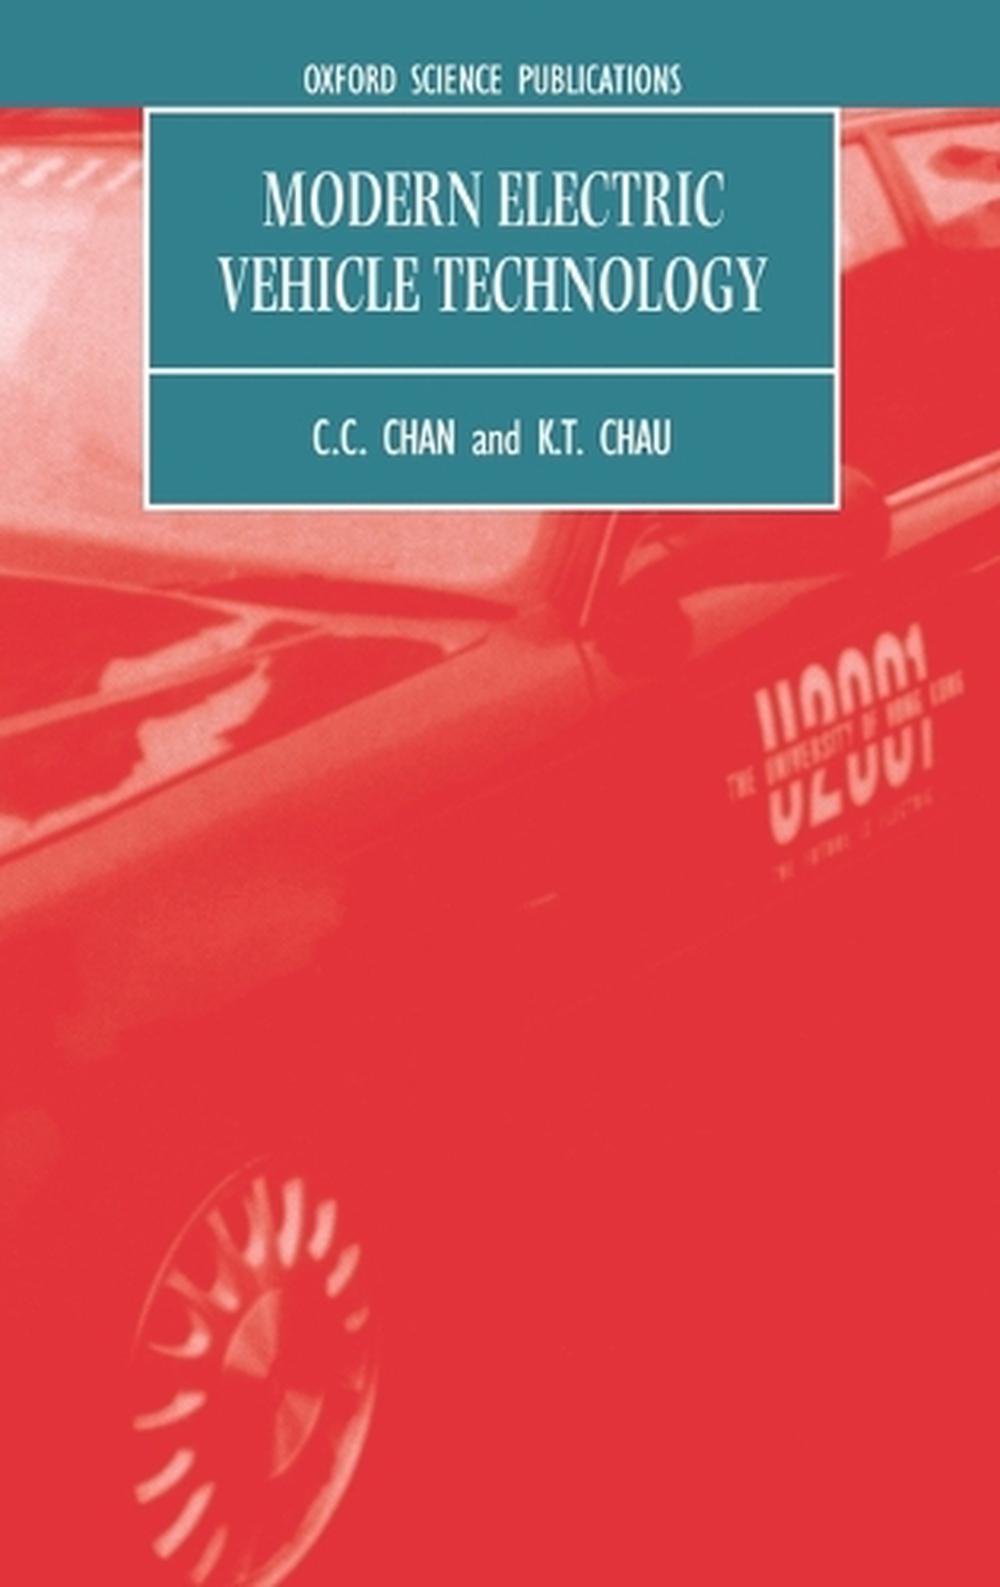 Modern Electric Vehicle Technology by C.C. Chan (English) Hardcover